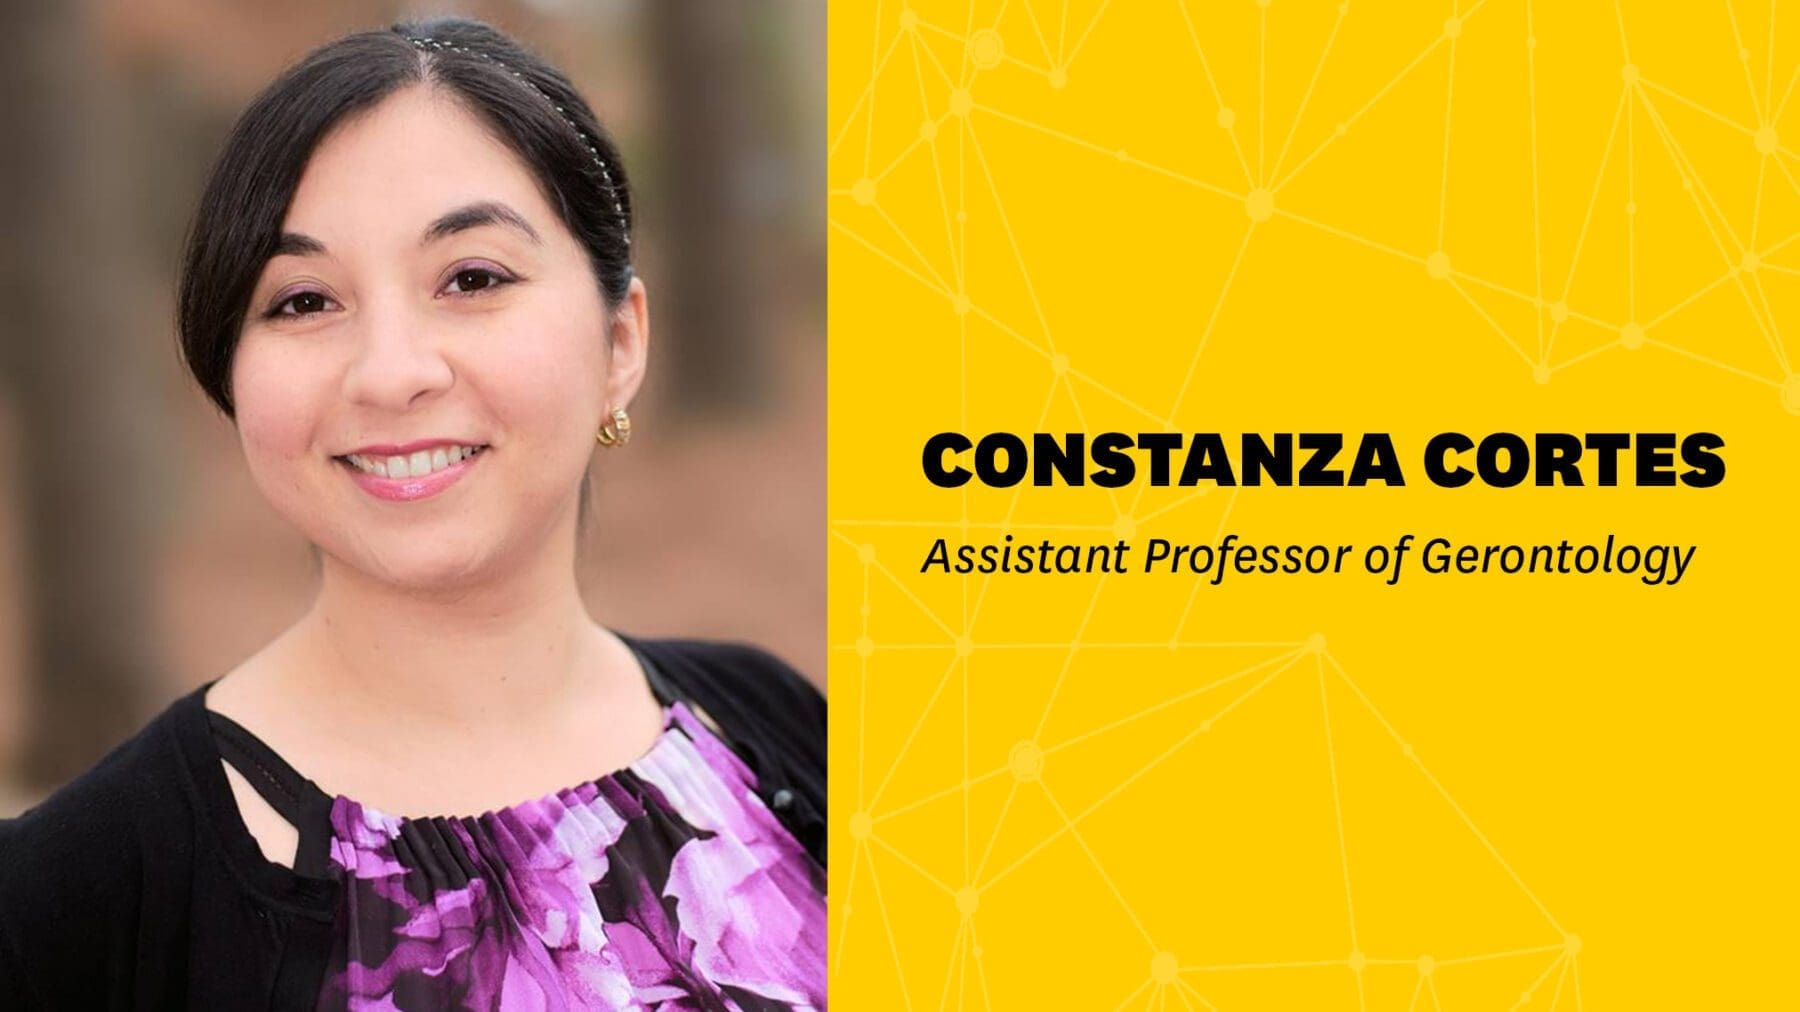 Podcast image of Constanza Cortes with her name and professor title